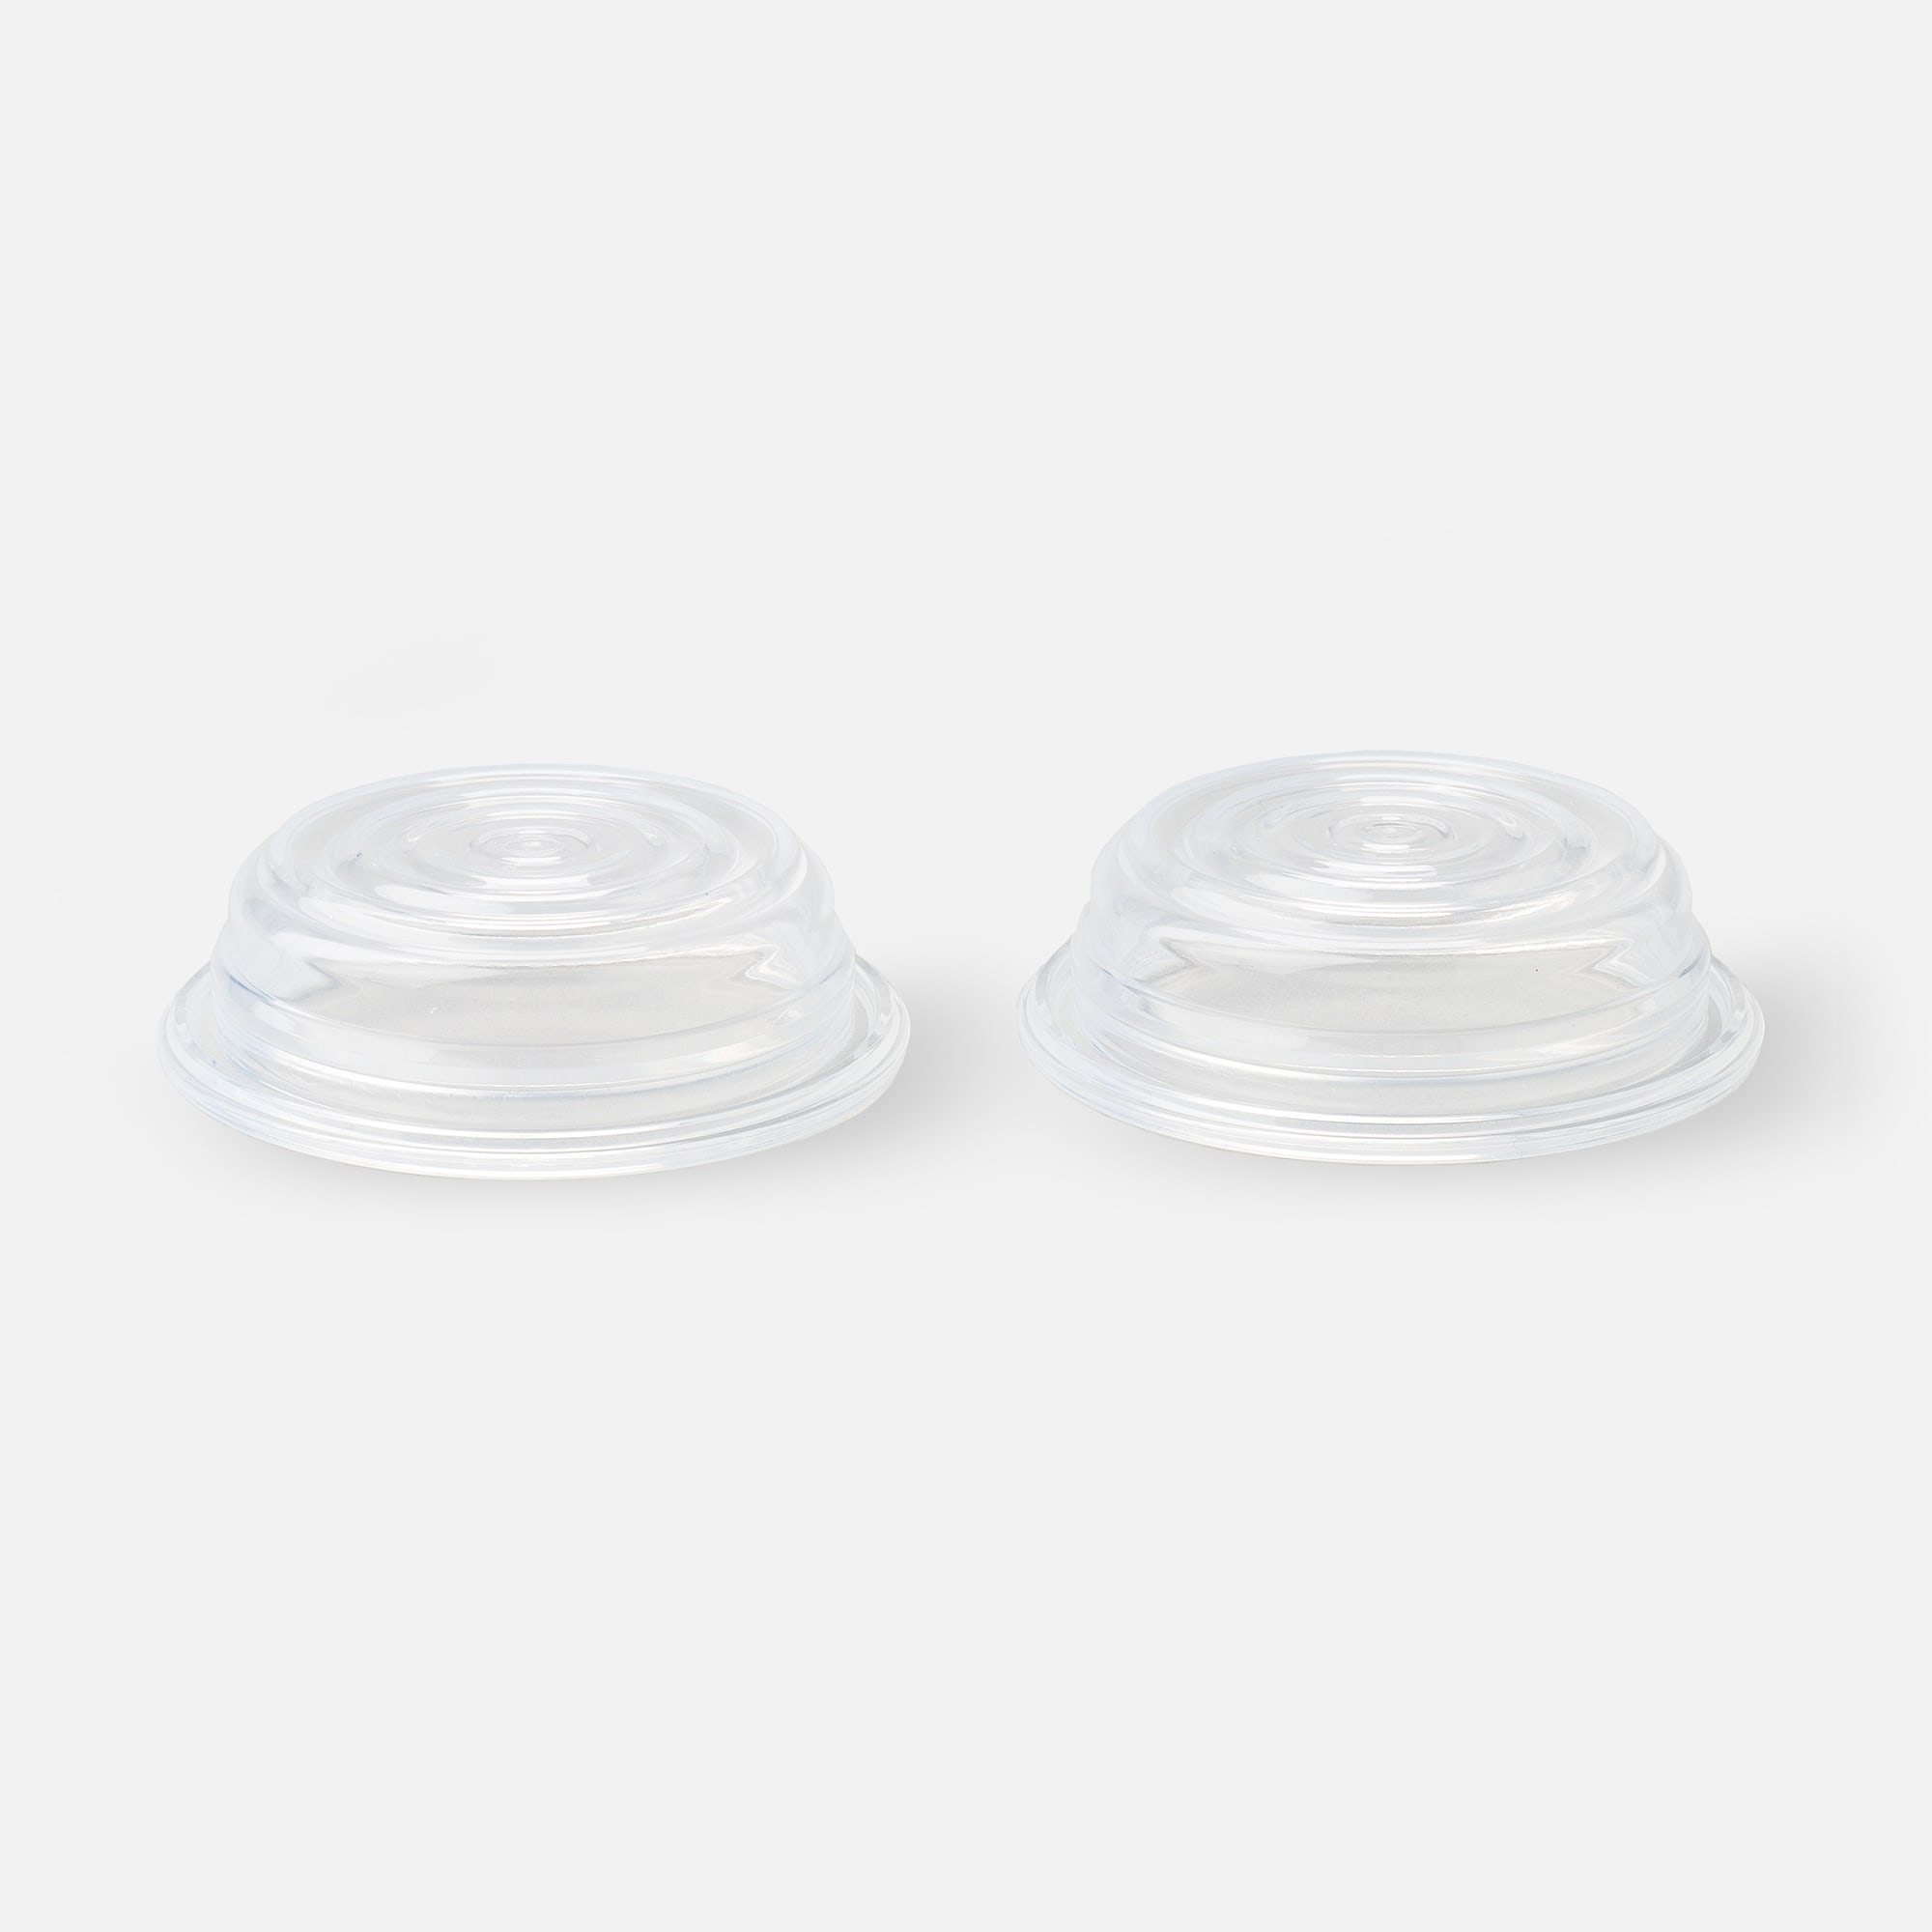 Brown's Membranes for Electric Breast Pump Dr 